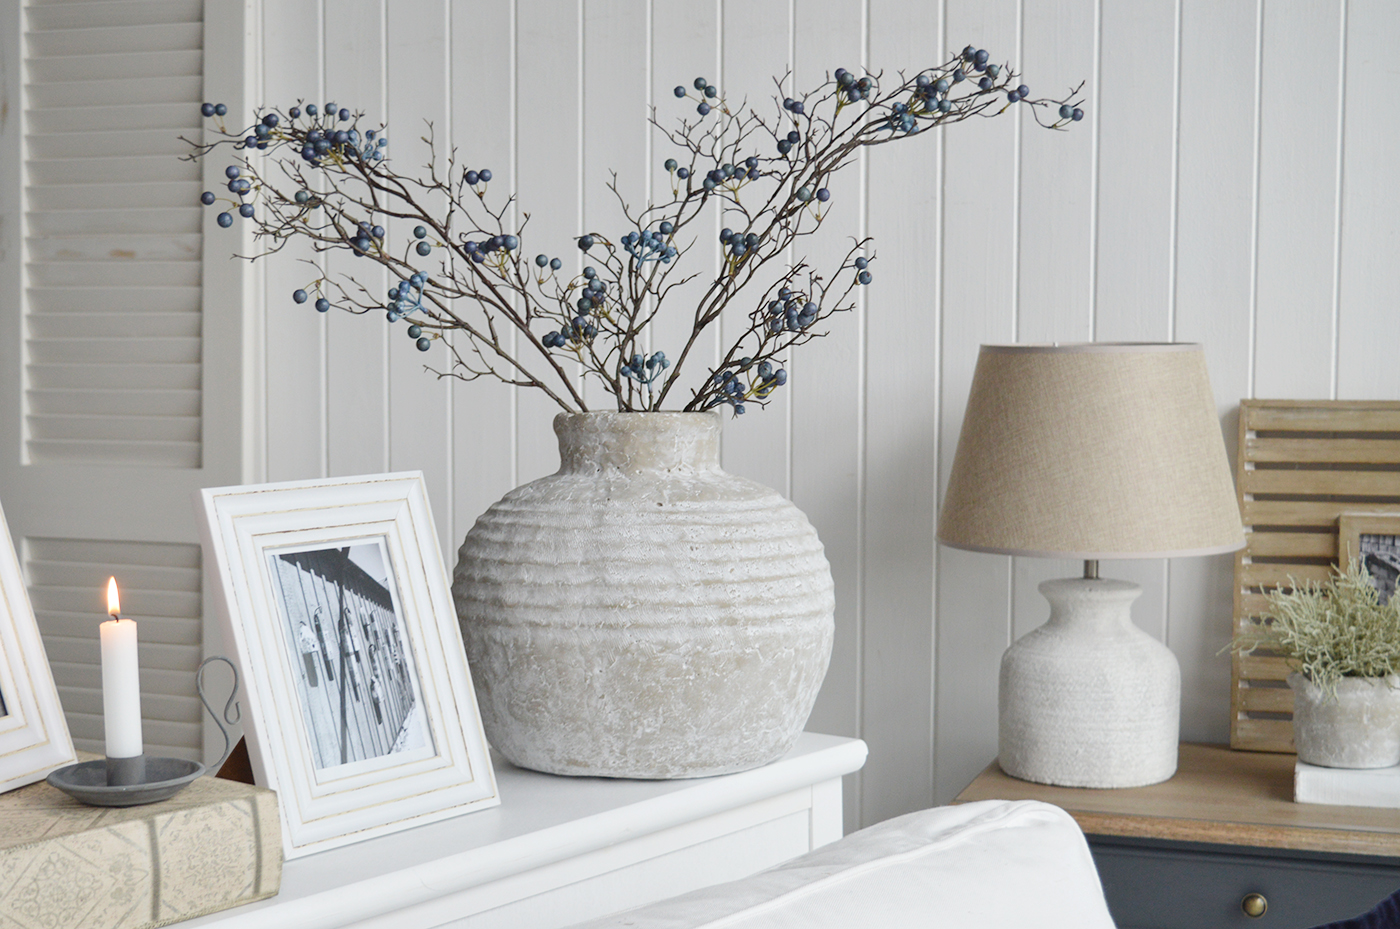 Faux blue berries branch in the Newfane rustic stone jug for modern country, coastal and farmhouse homes andinteriorsw